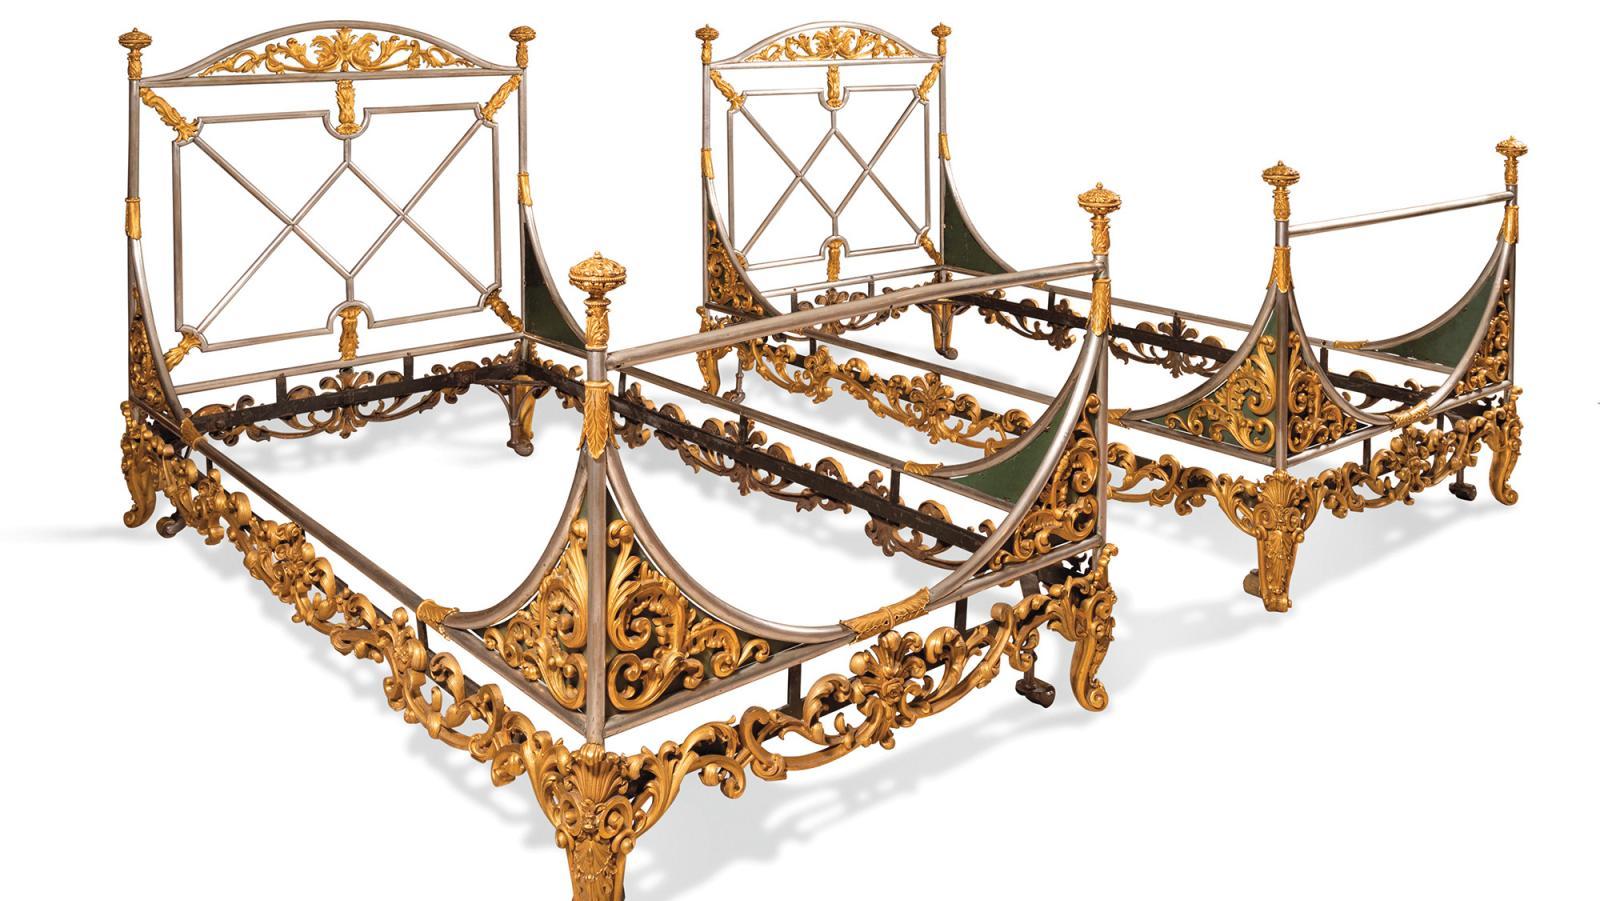 C. 1830, pair of iron and gilt bronze beds, gilt bronze, polished steel, wrought-iron... Spectacular Rococo Beds 